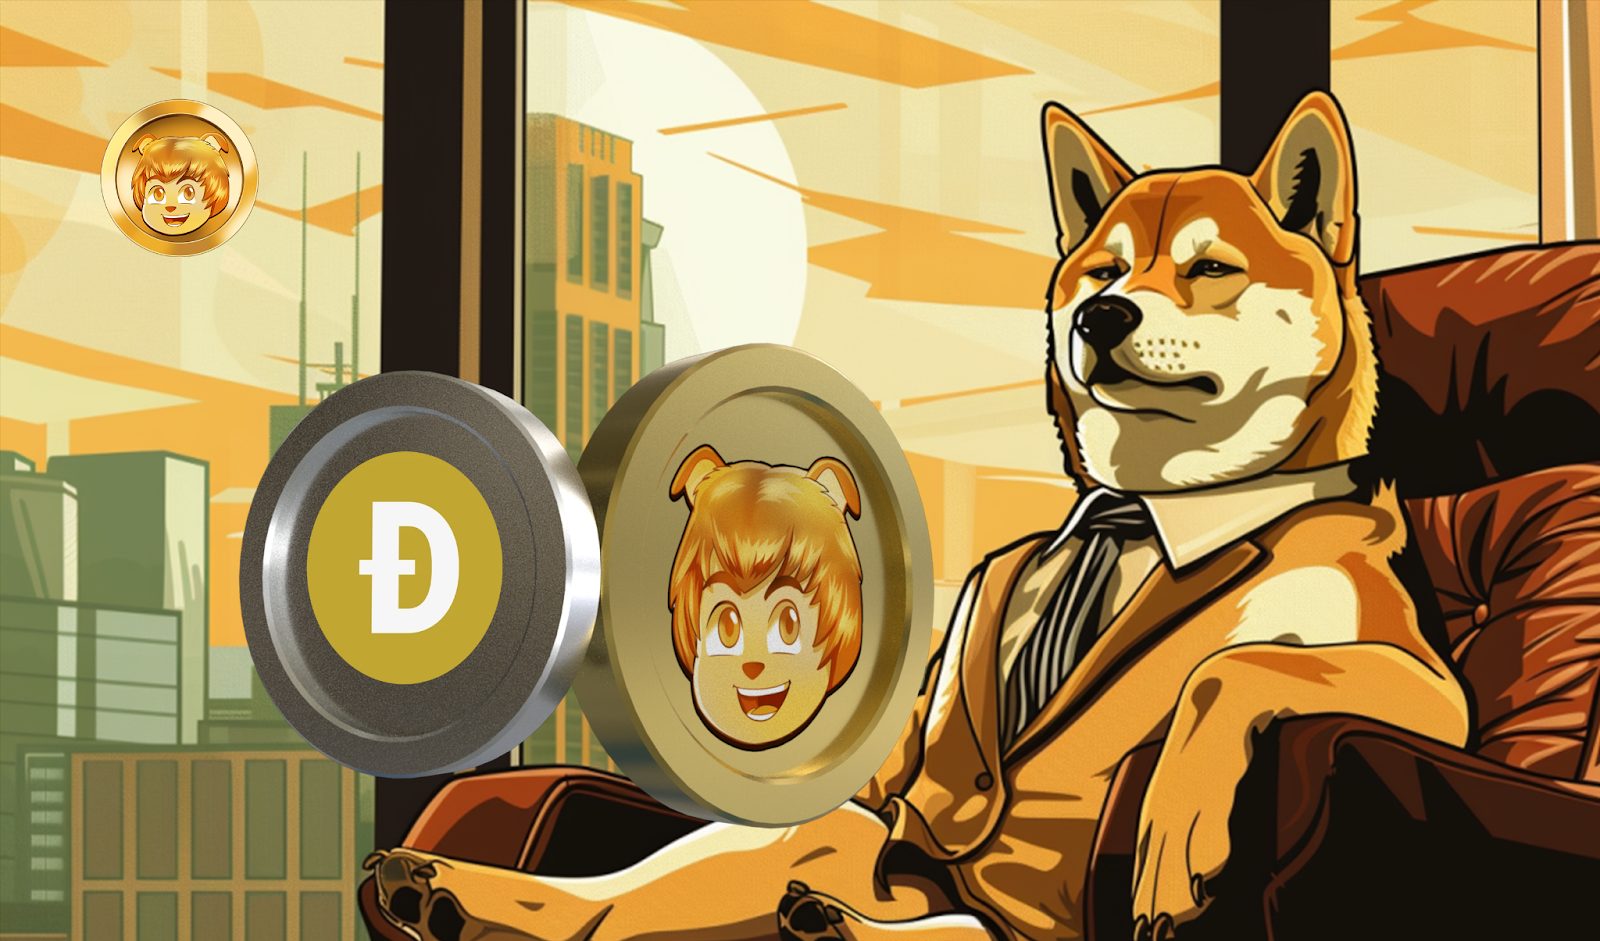 DOGE 3.0 Meme Coin AlexTheDoge Becomes Newest Market Craze, Here's Why